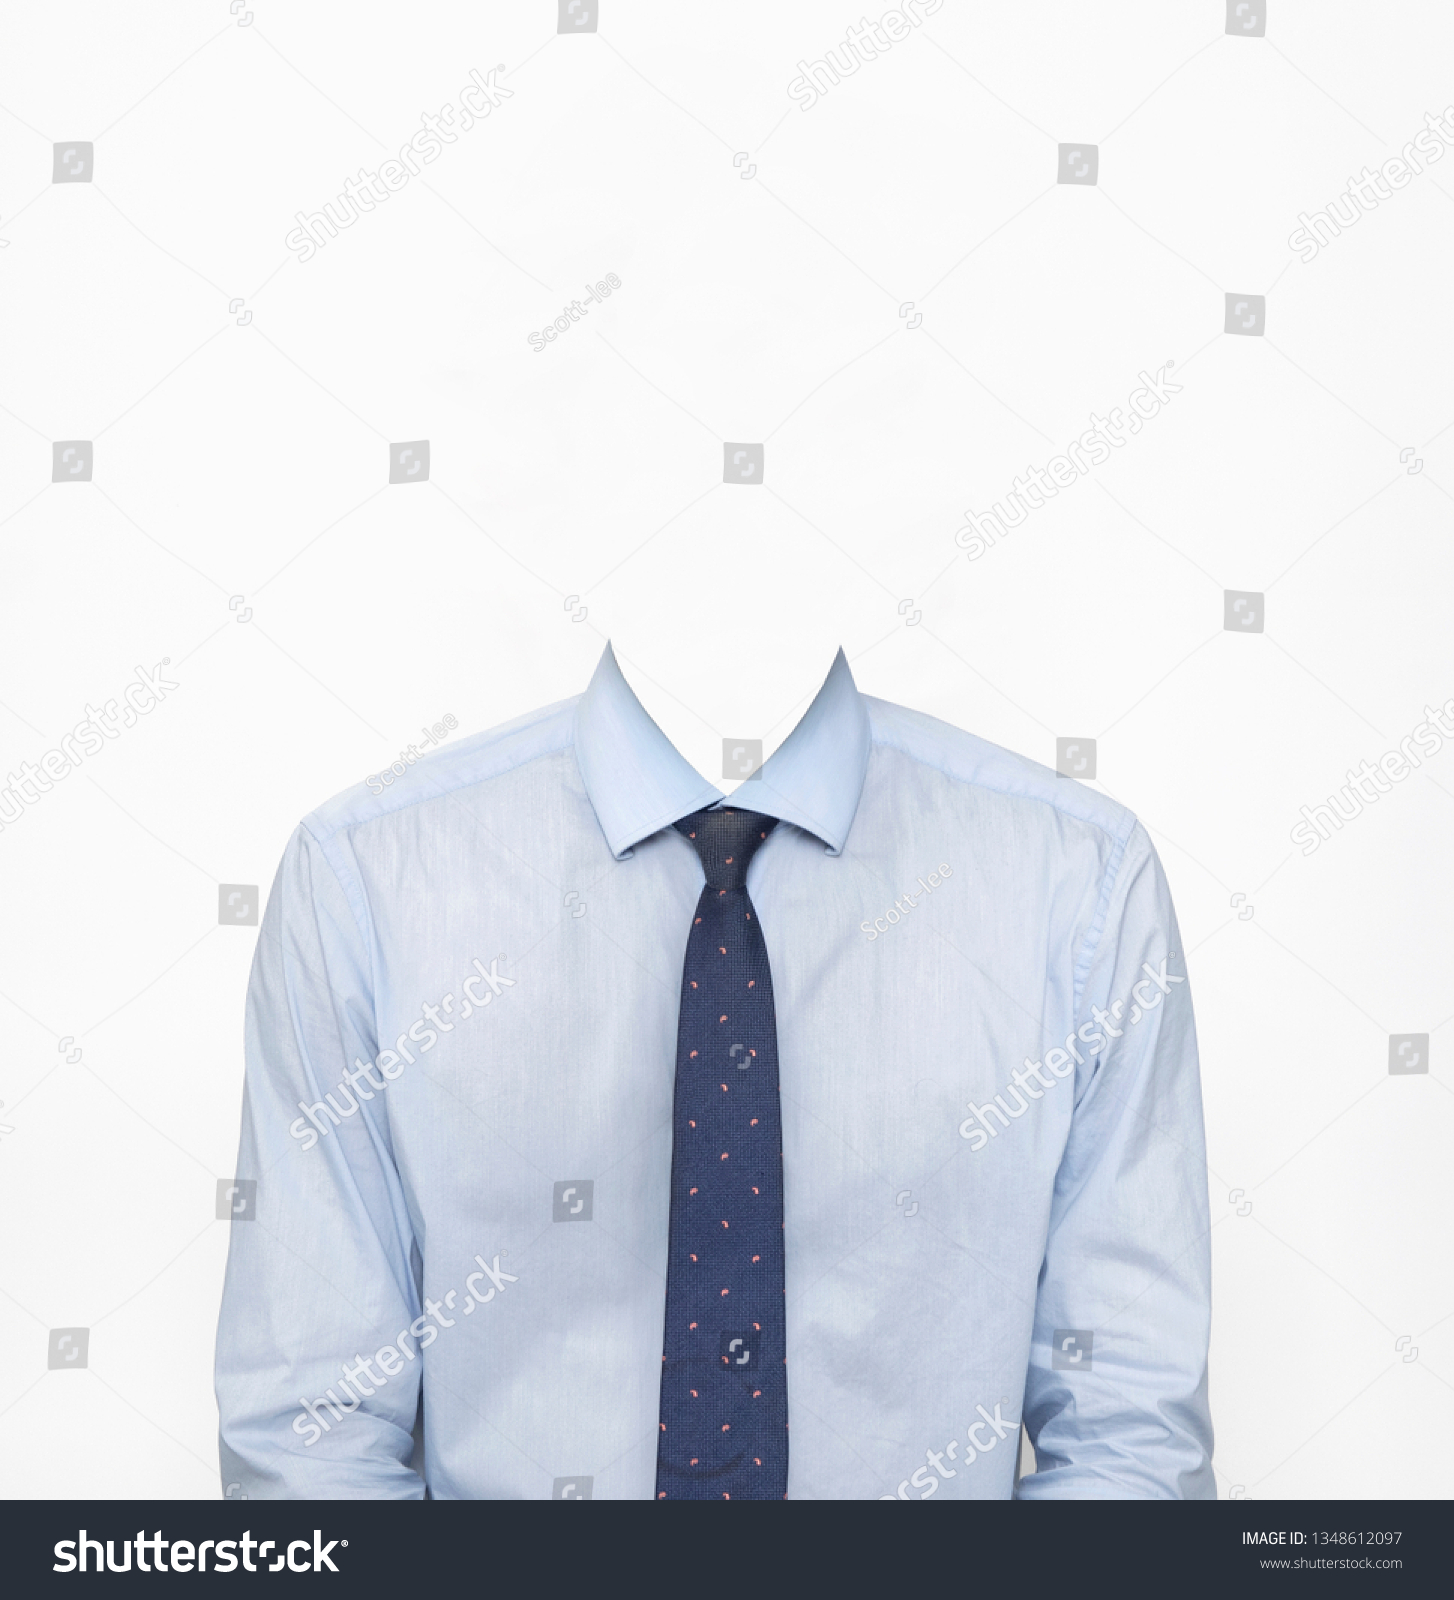 815 Dress without head Images, Stock Photos & Vectors | Shutterstock